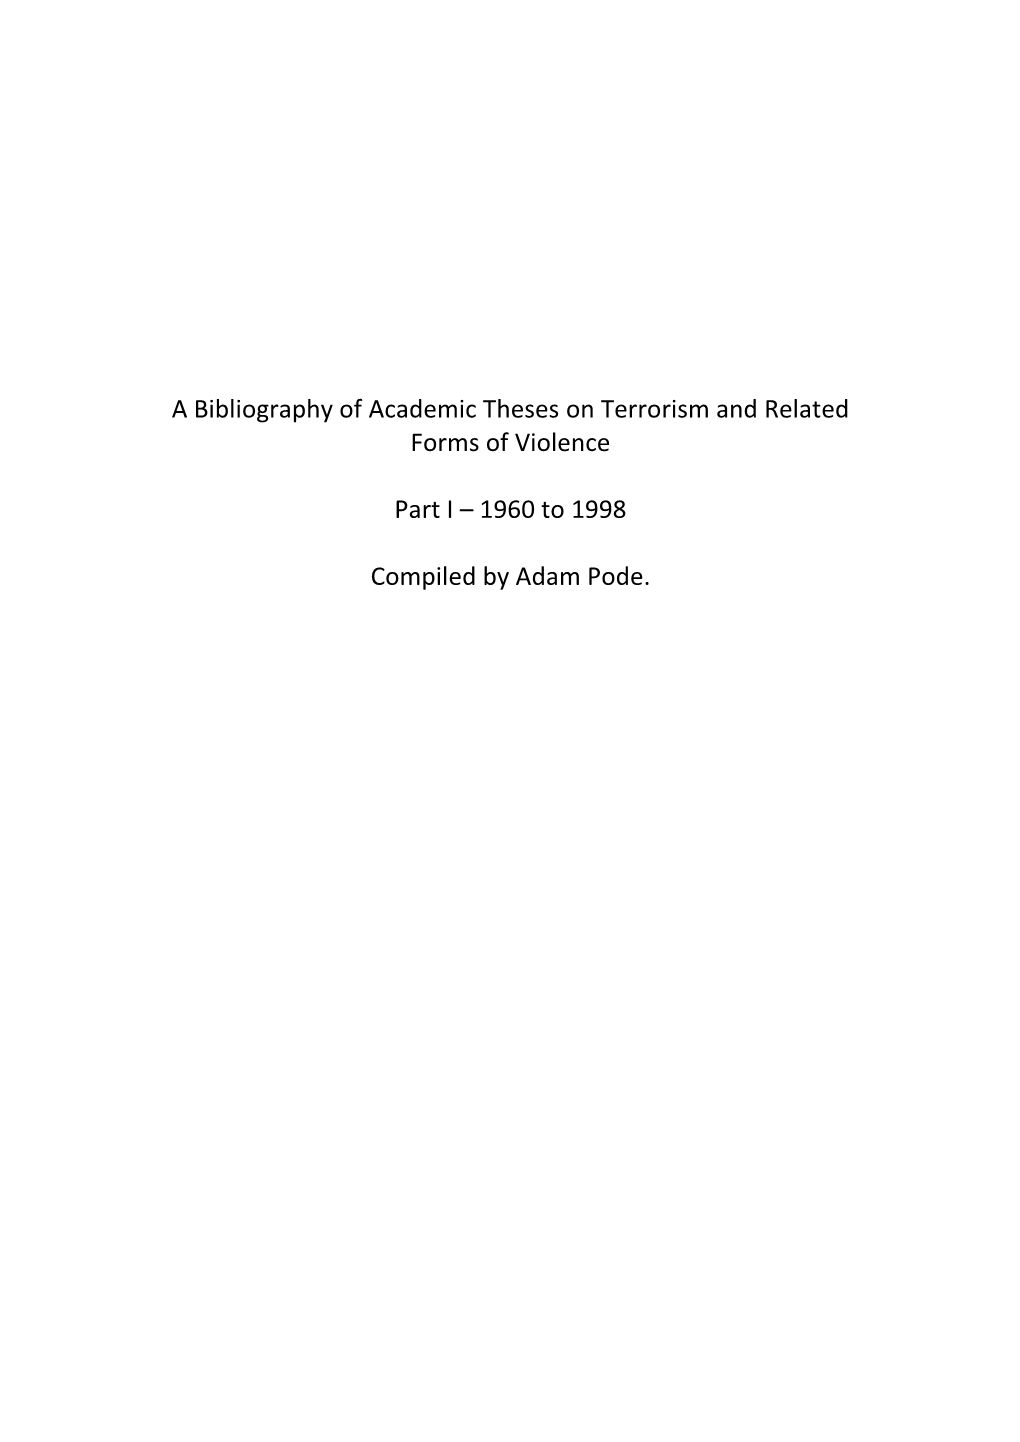 Bibliography of Terrorism Theses